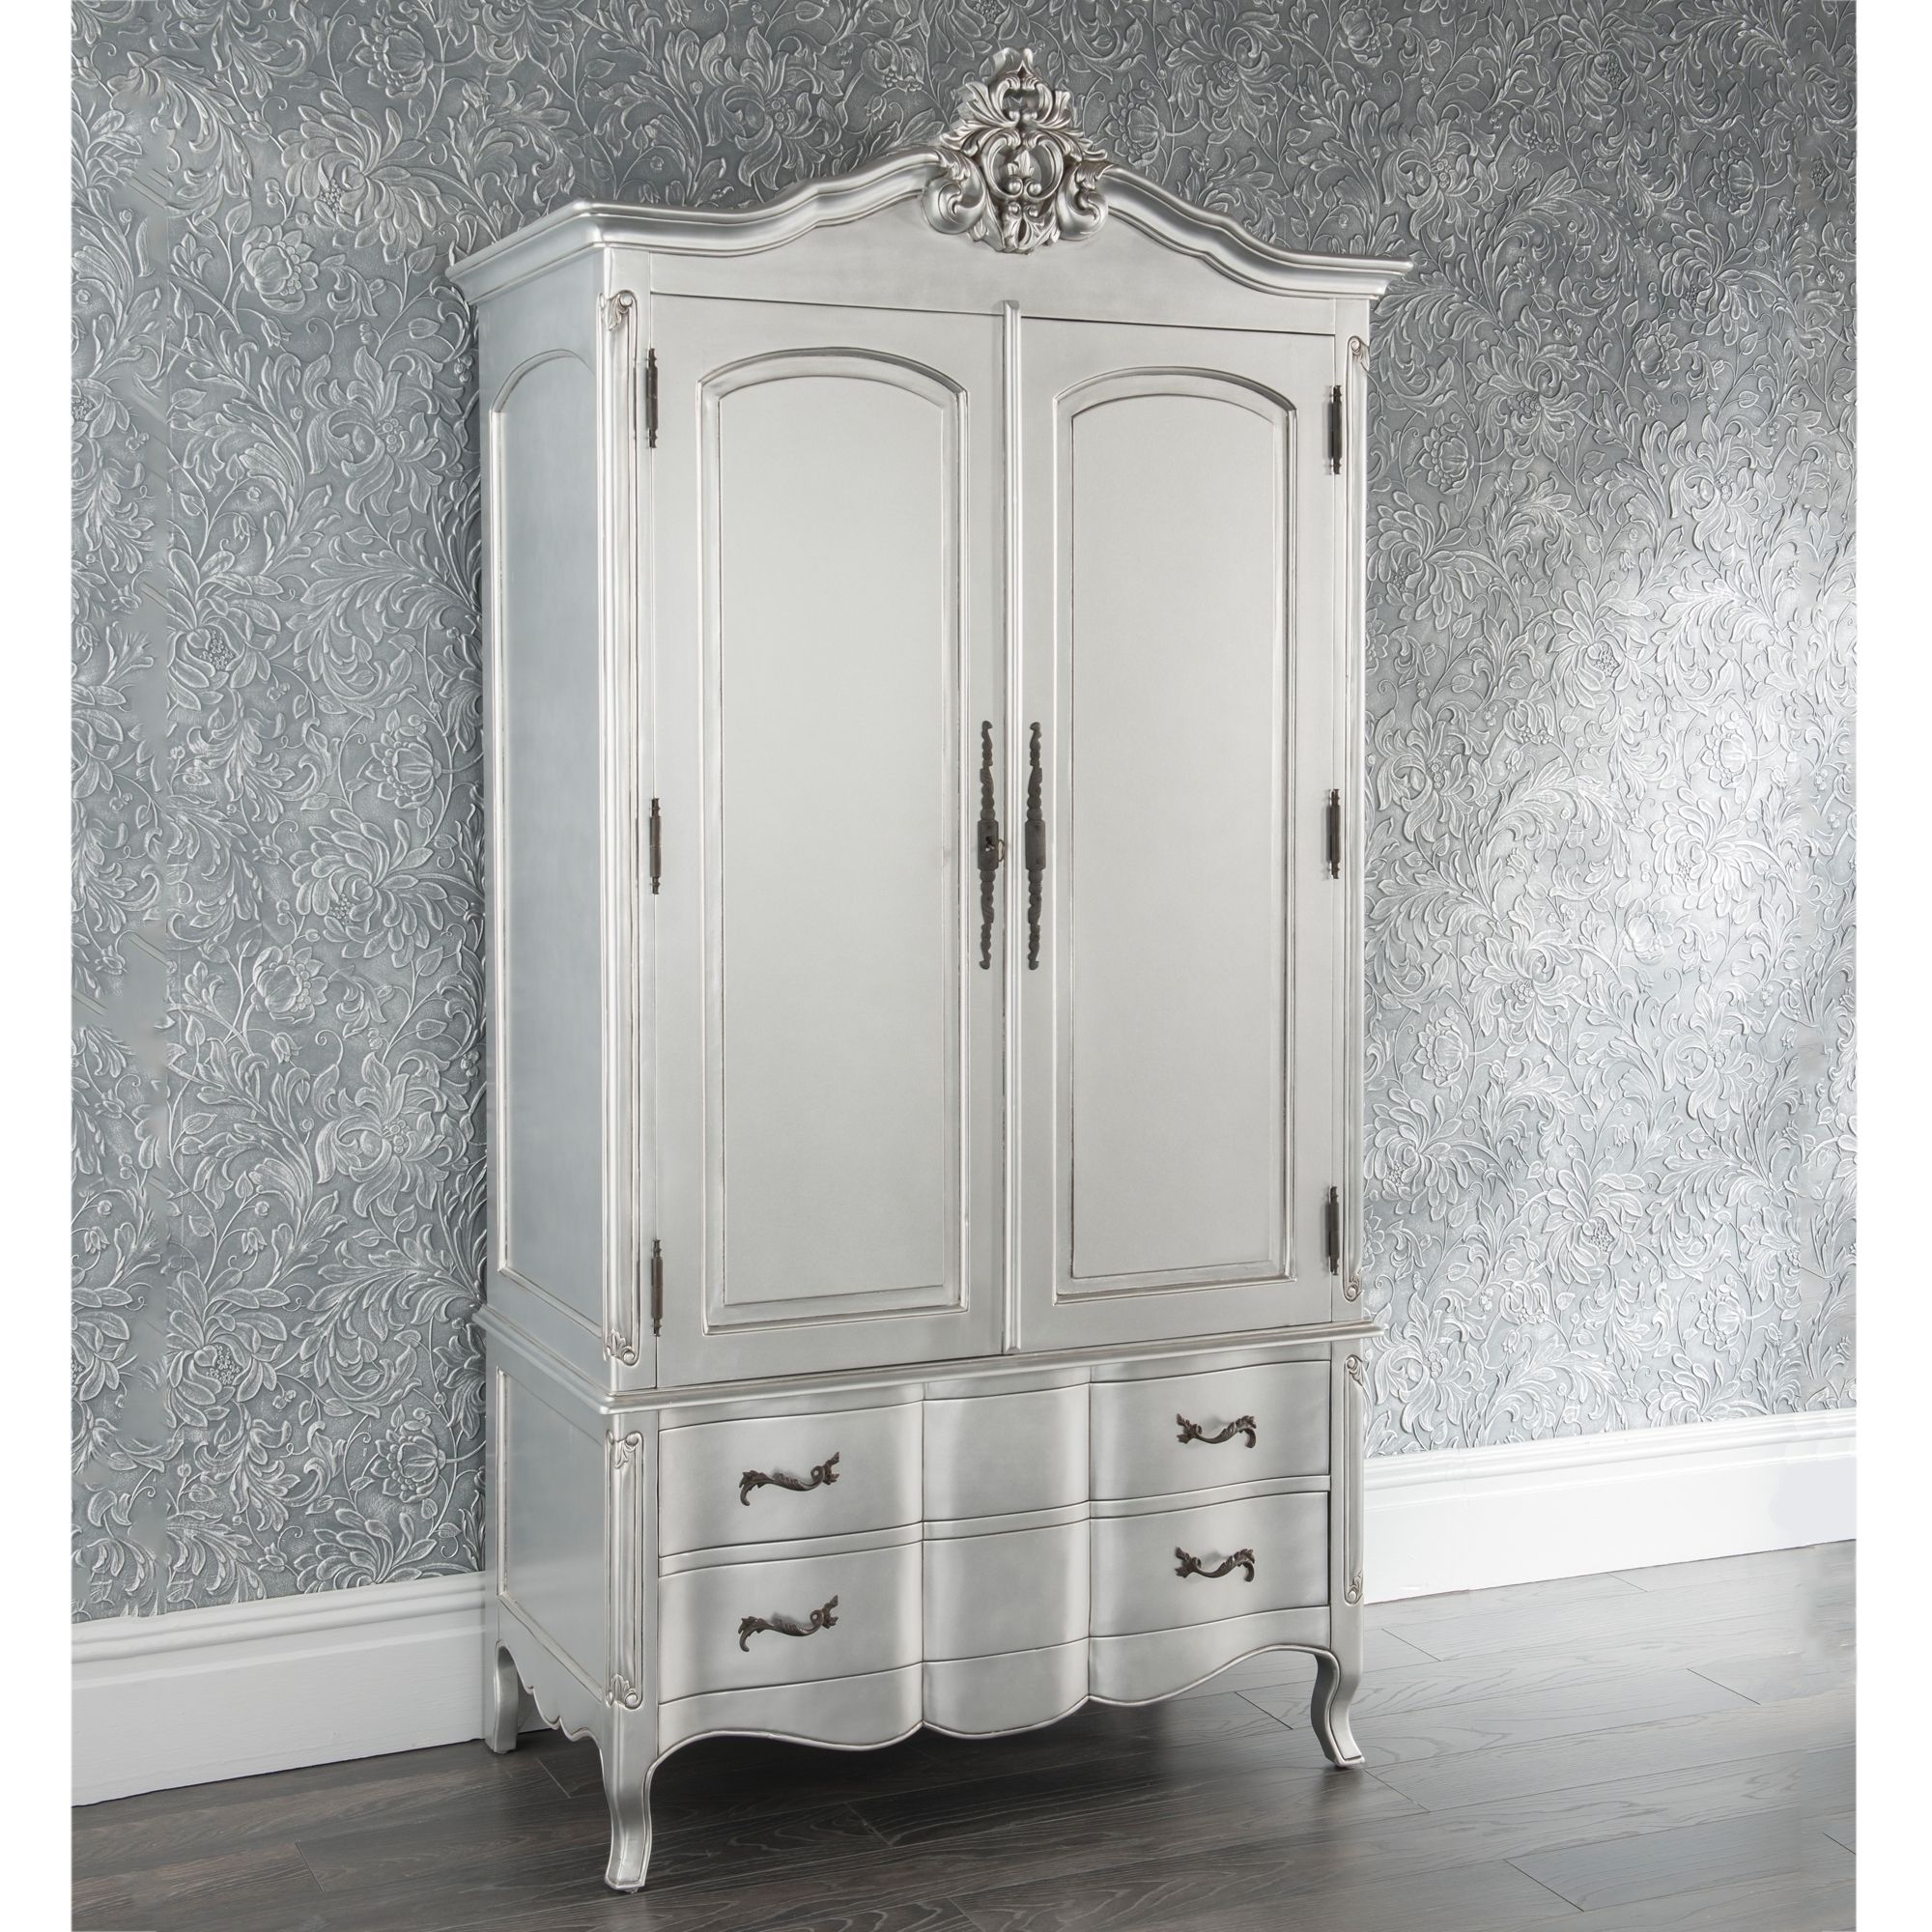 Estelle Antique French Style Wardrobe | French Style Furniture For Silver Wardrobes (Gallery 3 of 20)